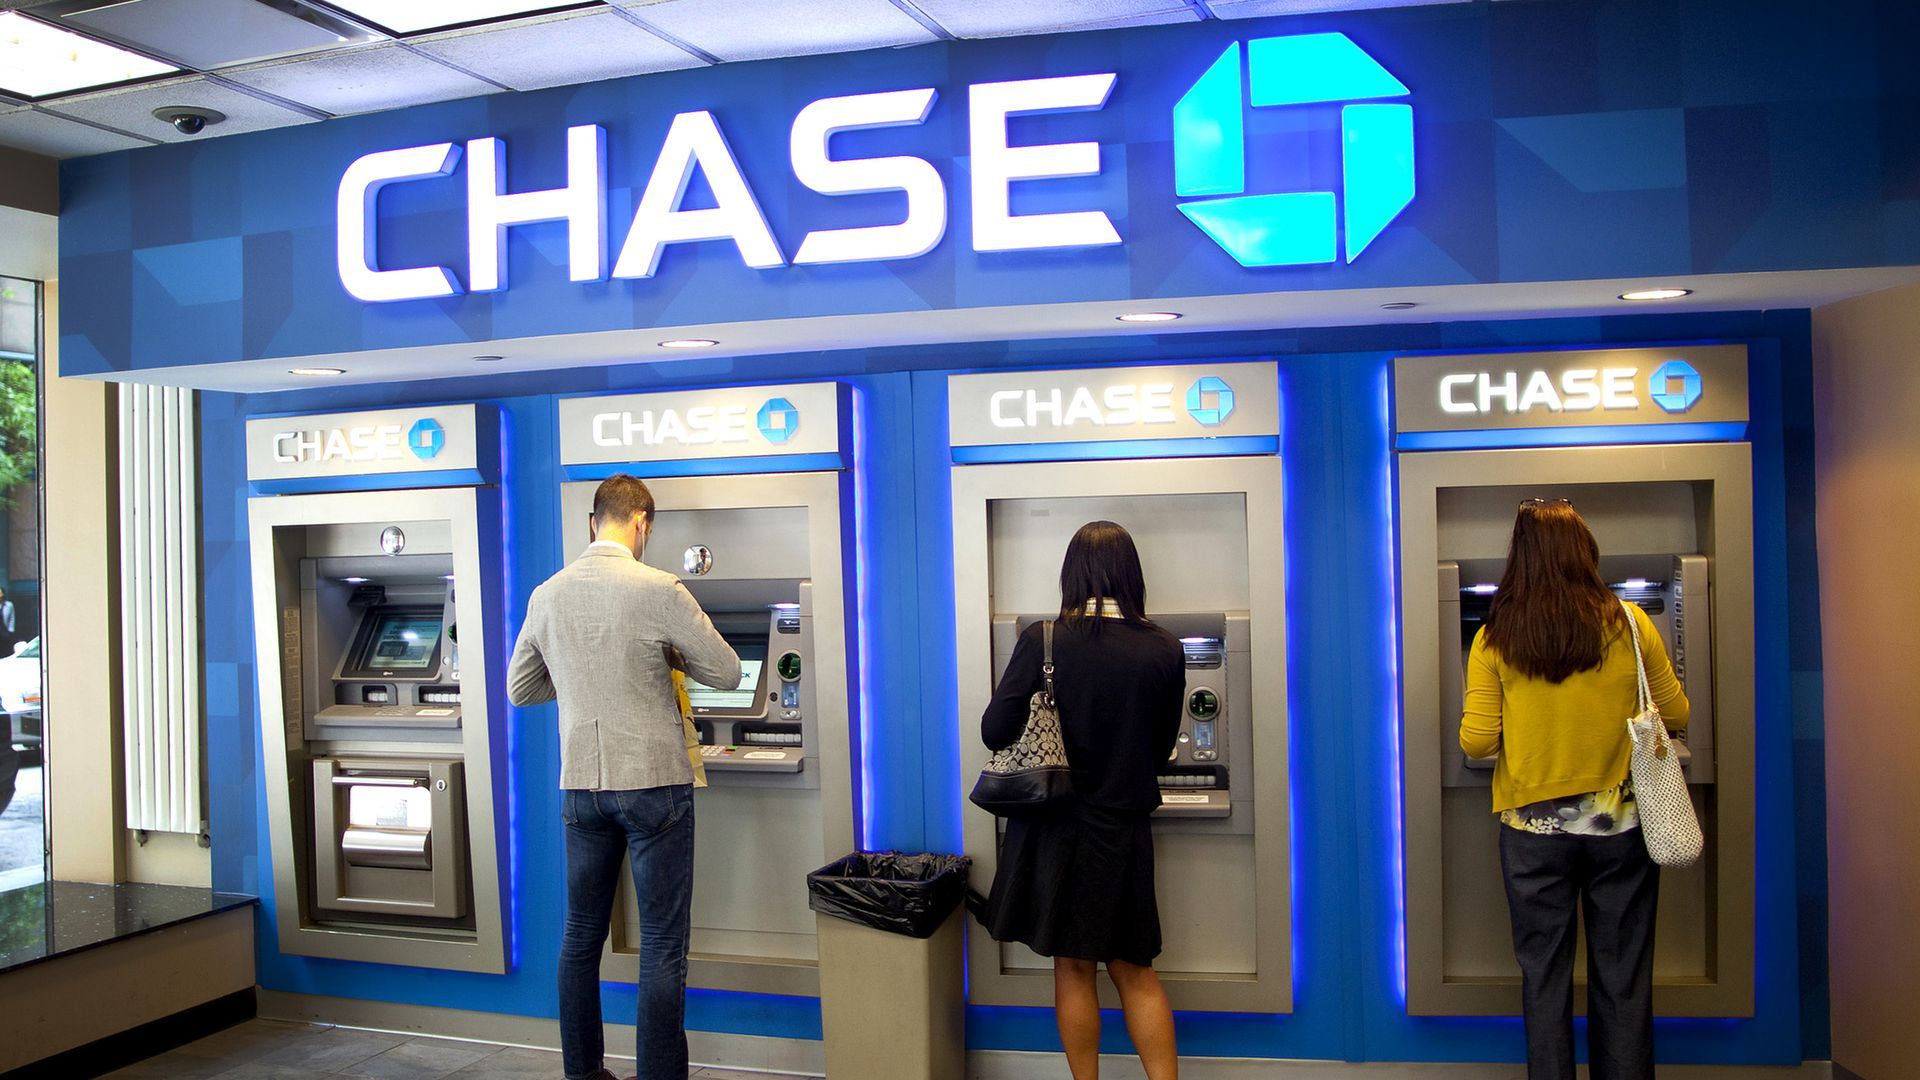 Image showing customers using Chase kiosks.